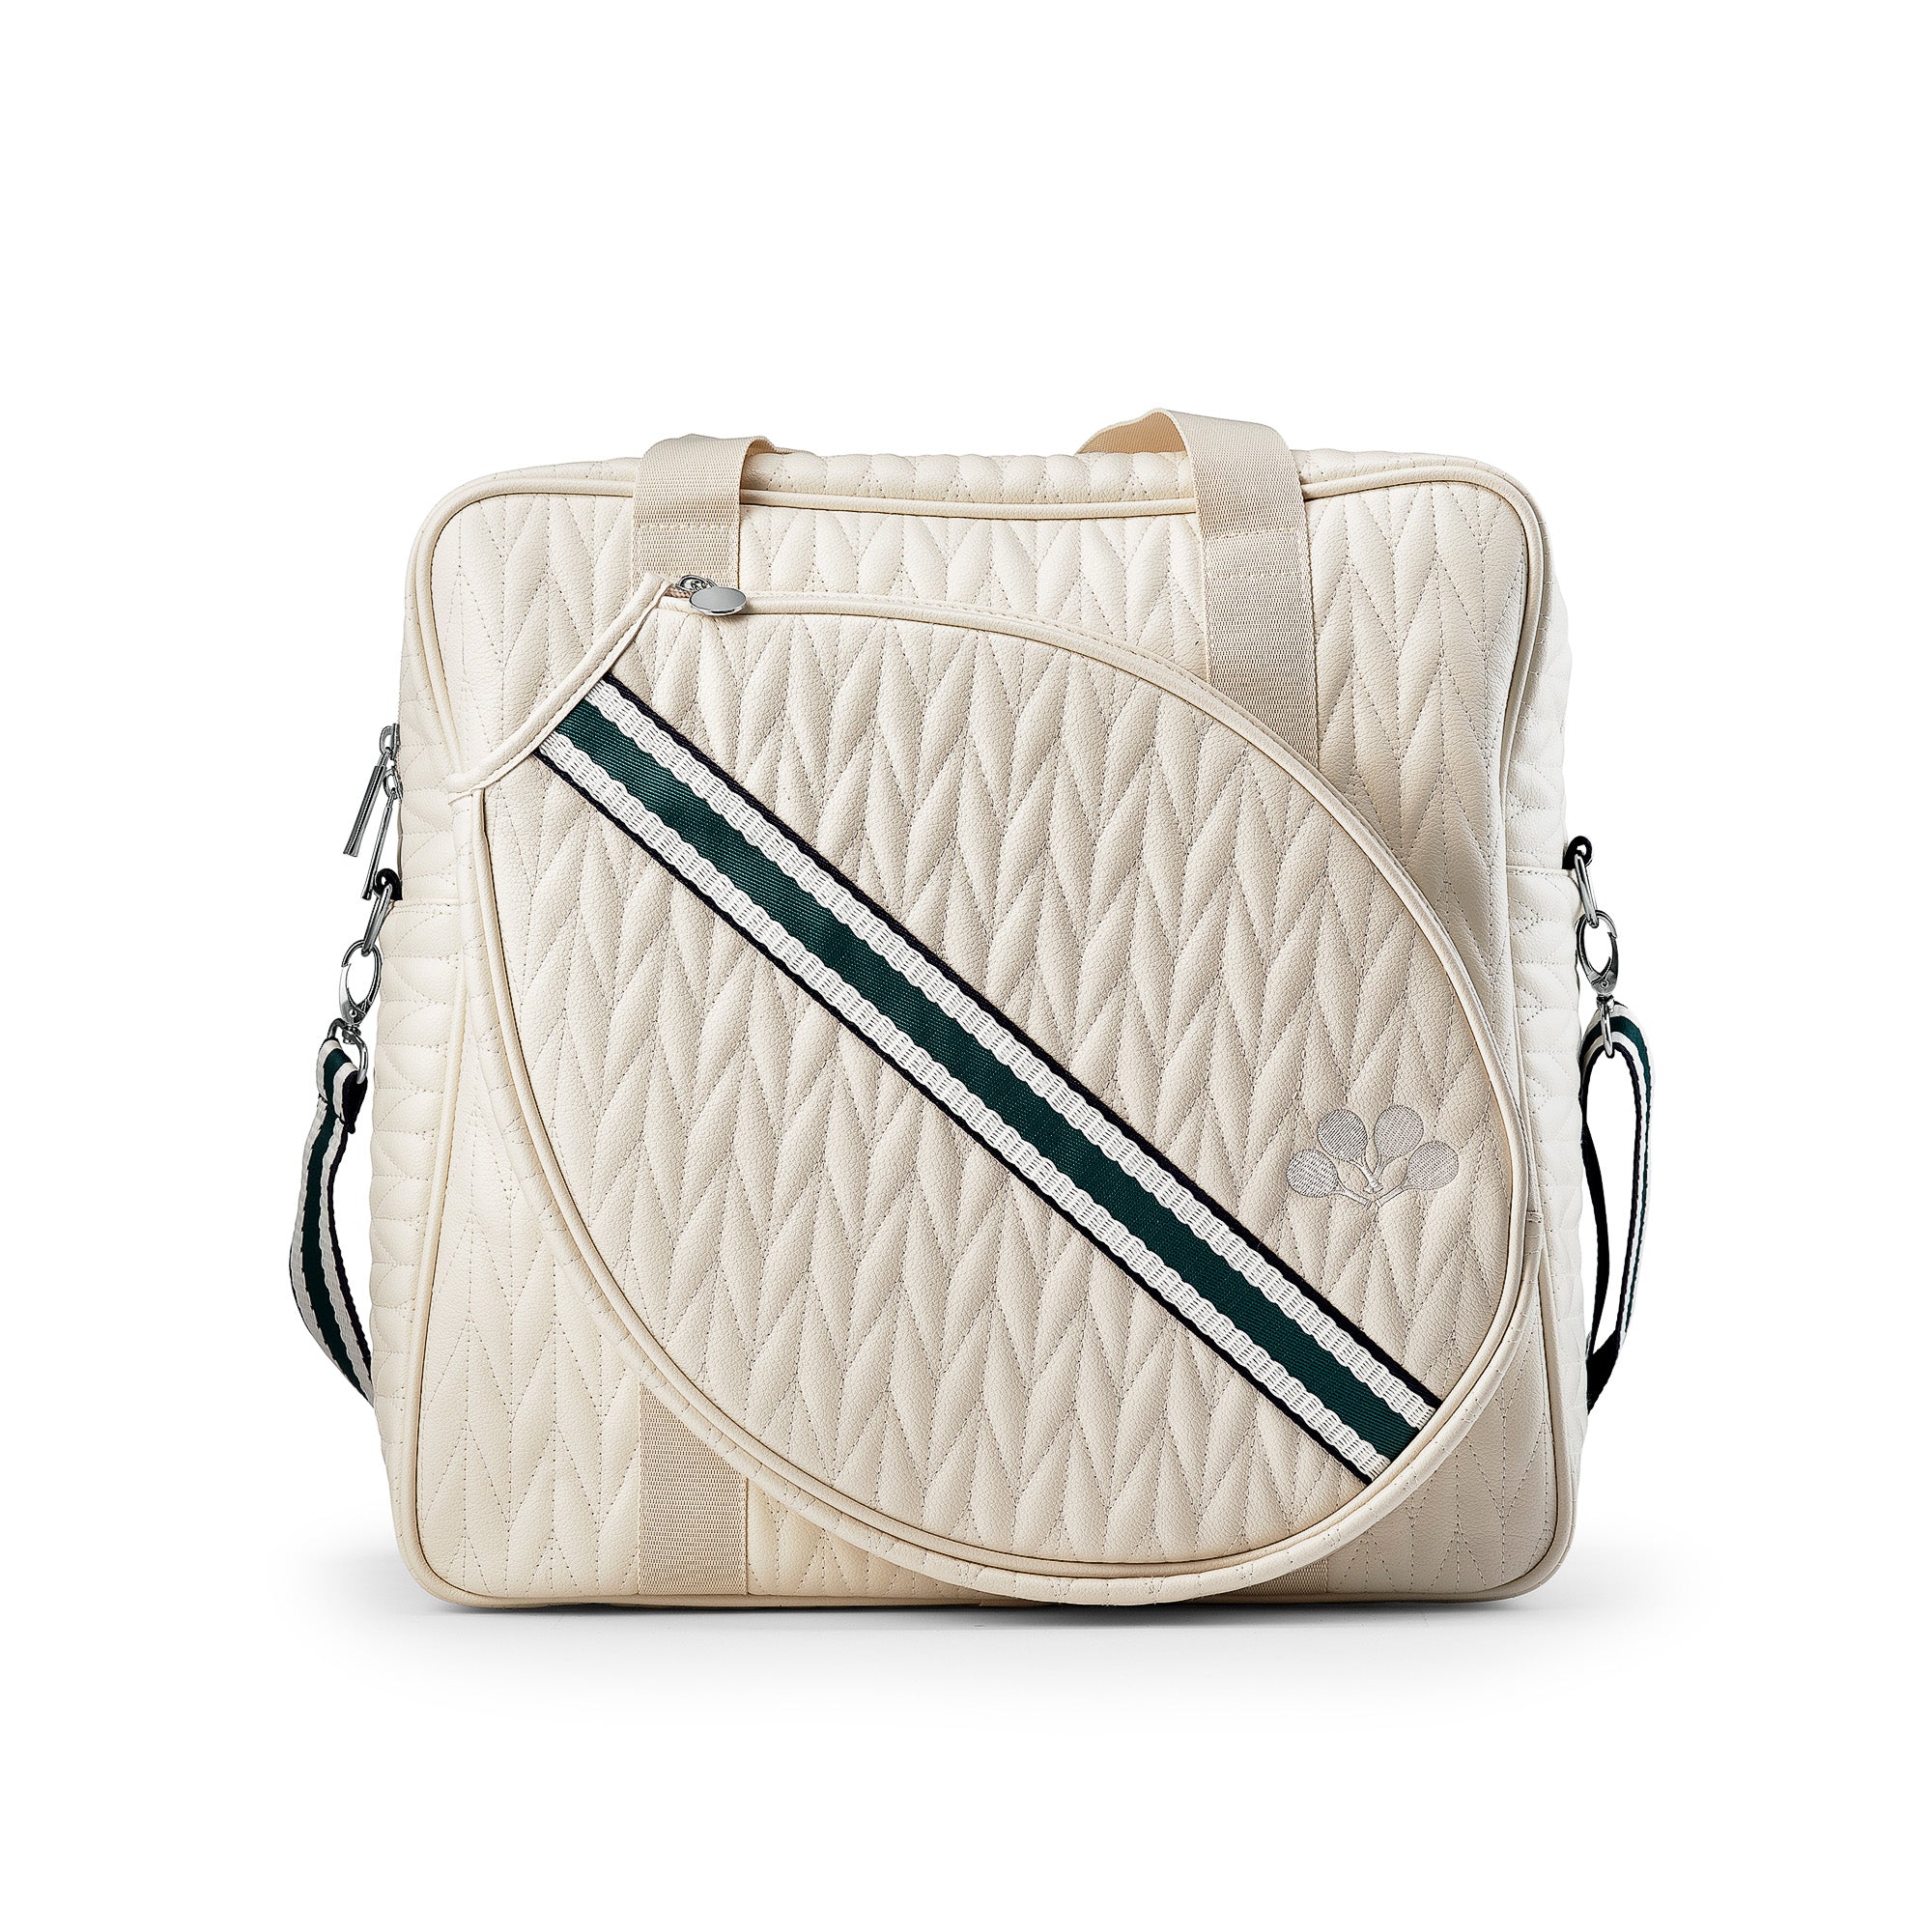 Esserly Tennis Bag Front in White and Green Webbing